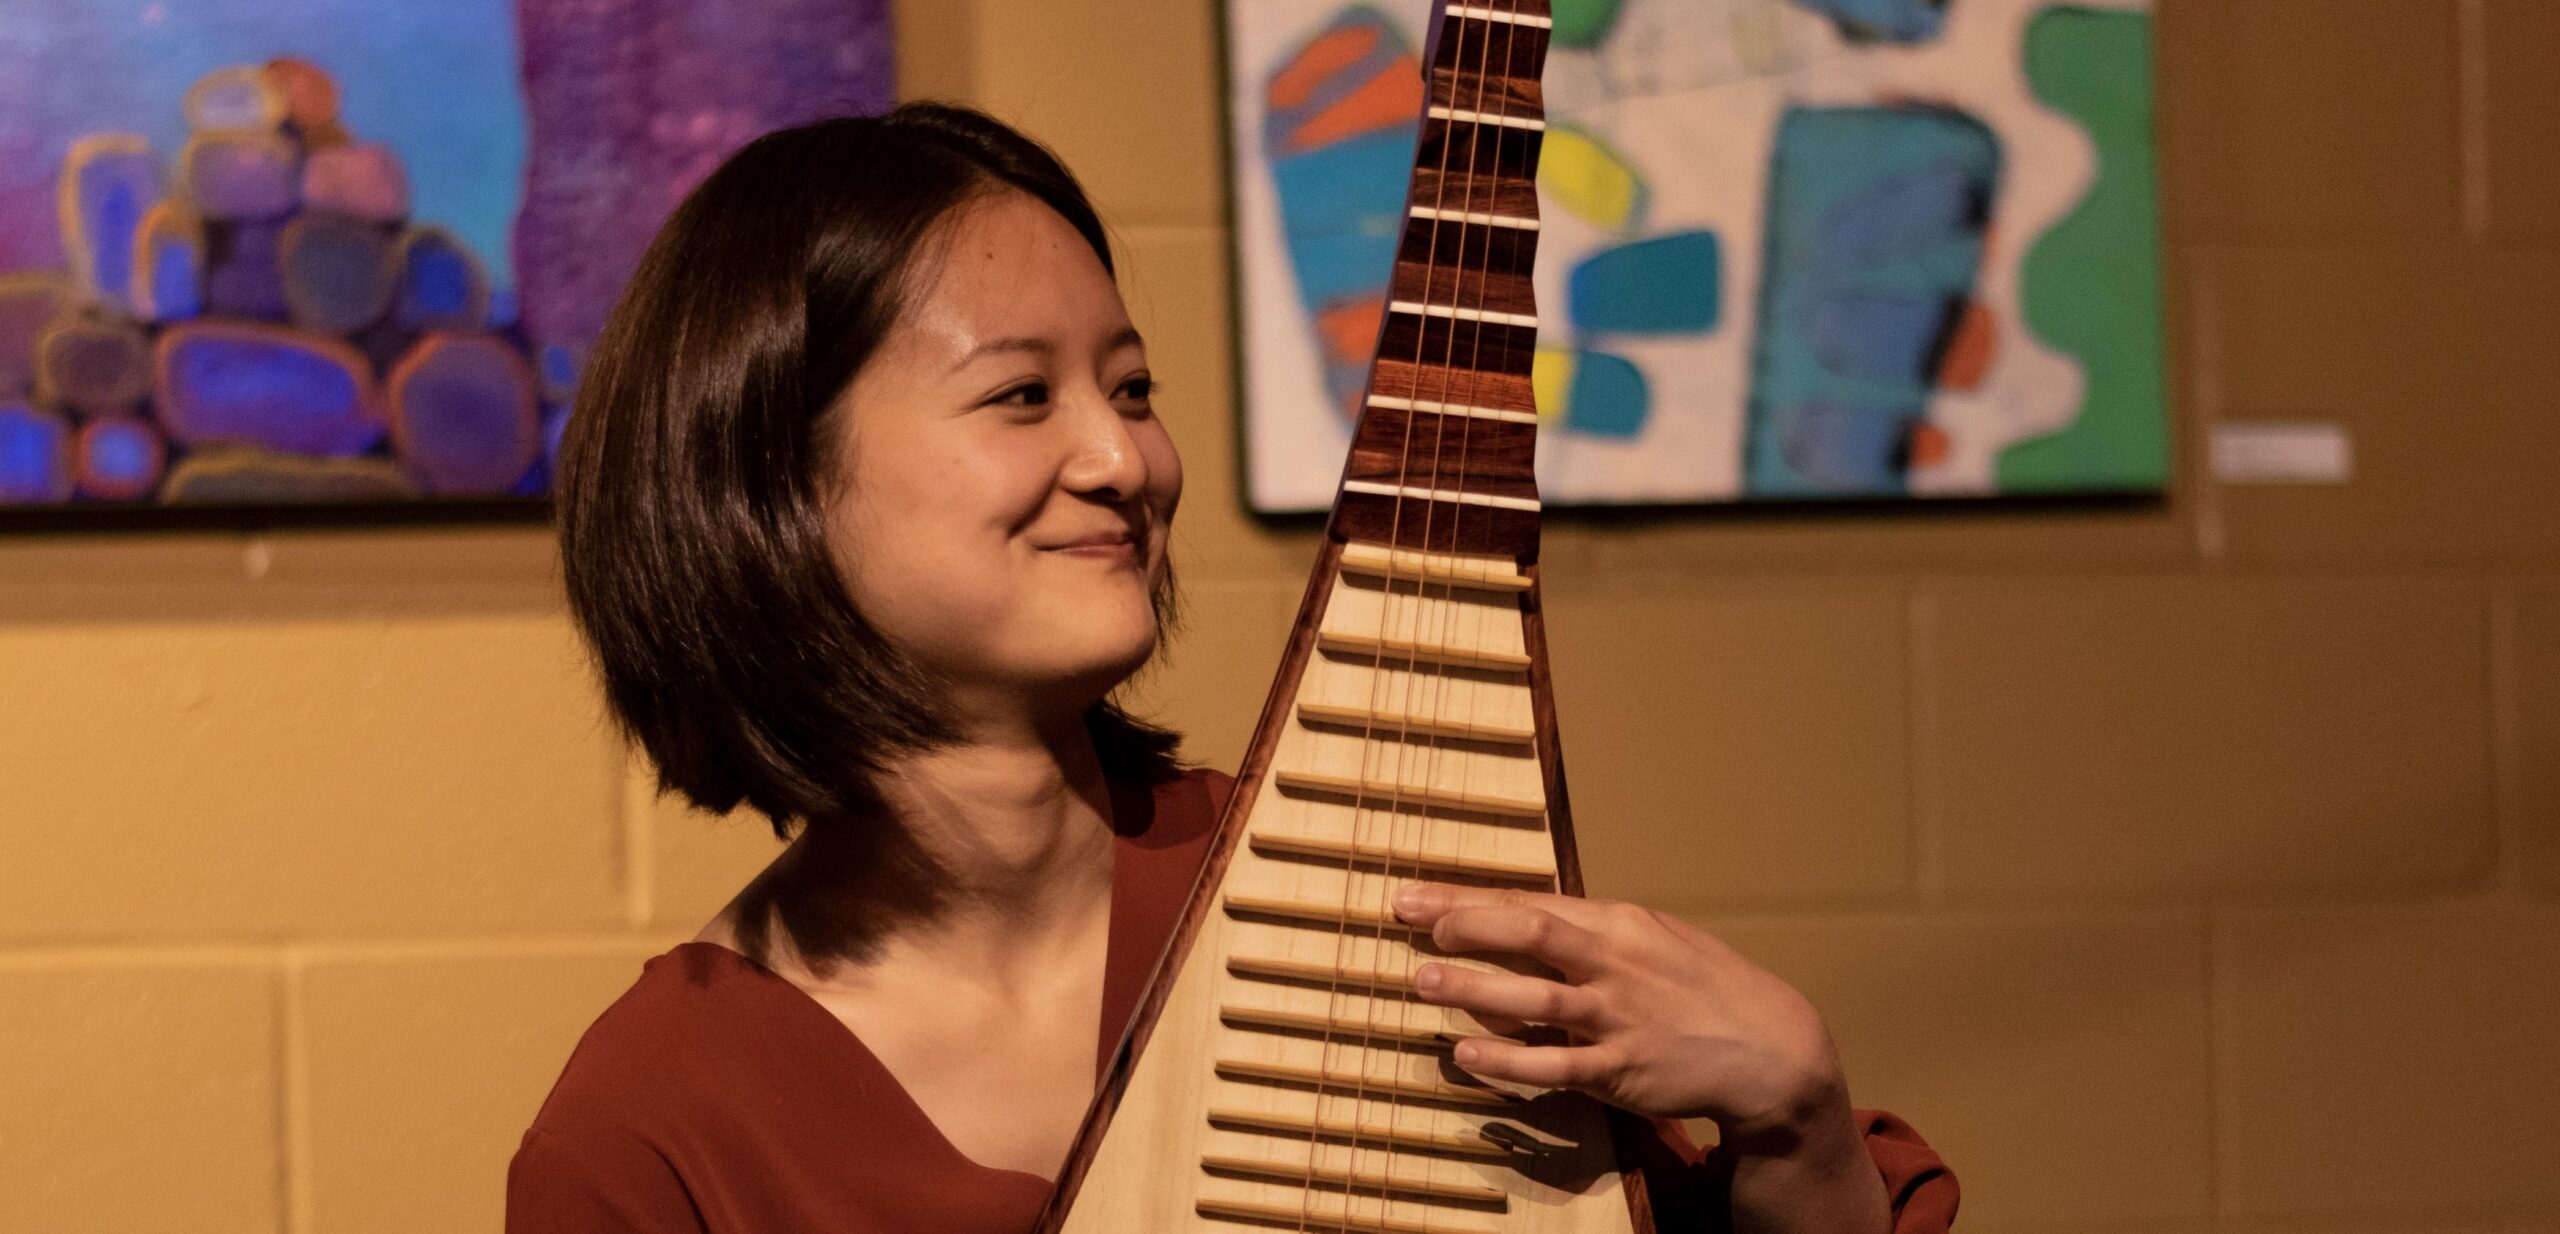 Musicians of Rochester: Leah Ou who performs under the name Pipa is one of the musicians featured.